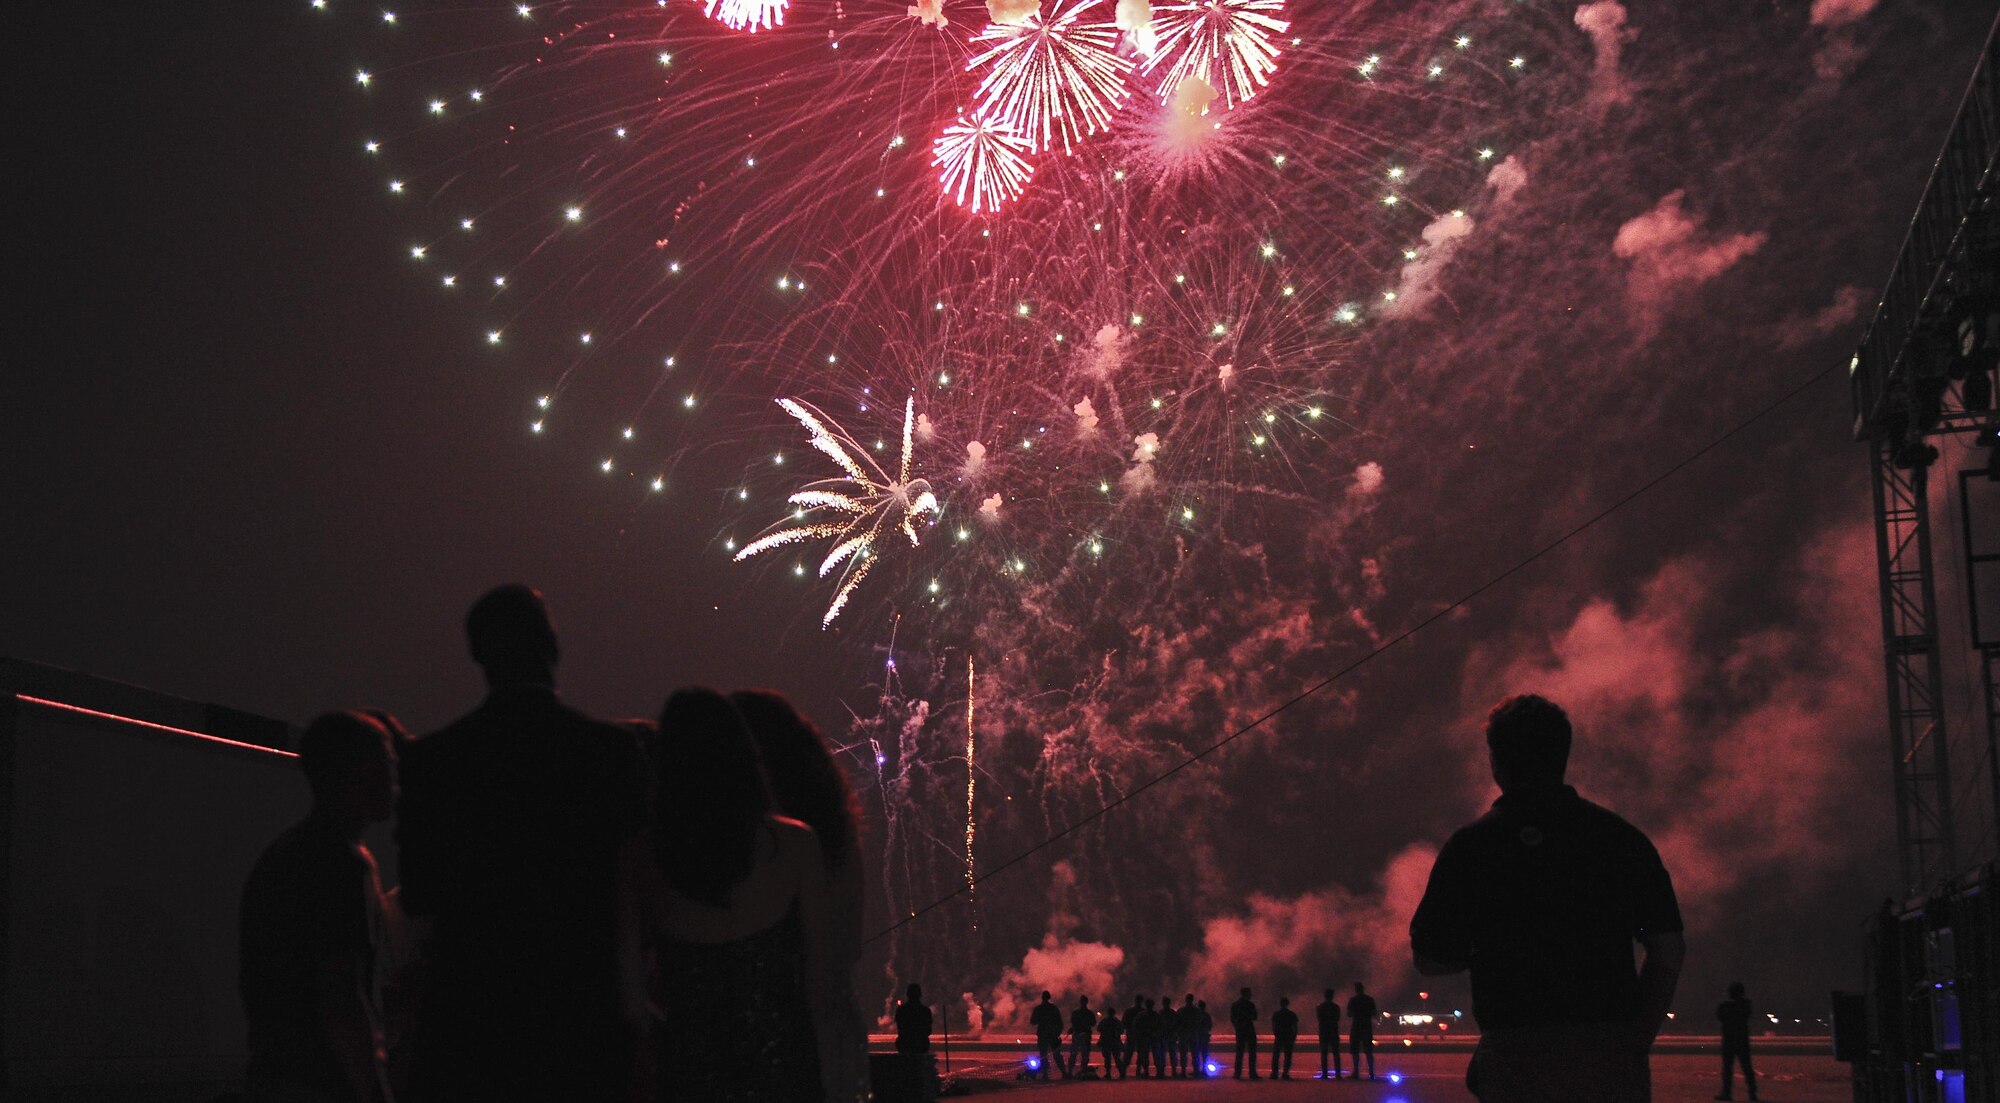 Airmen and entertainers gaze as the fireworks ignite over the skies Osan Air Base, Republic of Korea, July 4, 2015, in celebration of Independence Day. The fireworks presentation was one of the last displays of entertainment for a crowd of more than 5,000 during the festival. (U.S. Air Force photo by Tech. Sgt. Travis Edwards/Released)